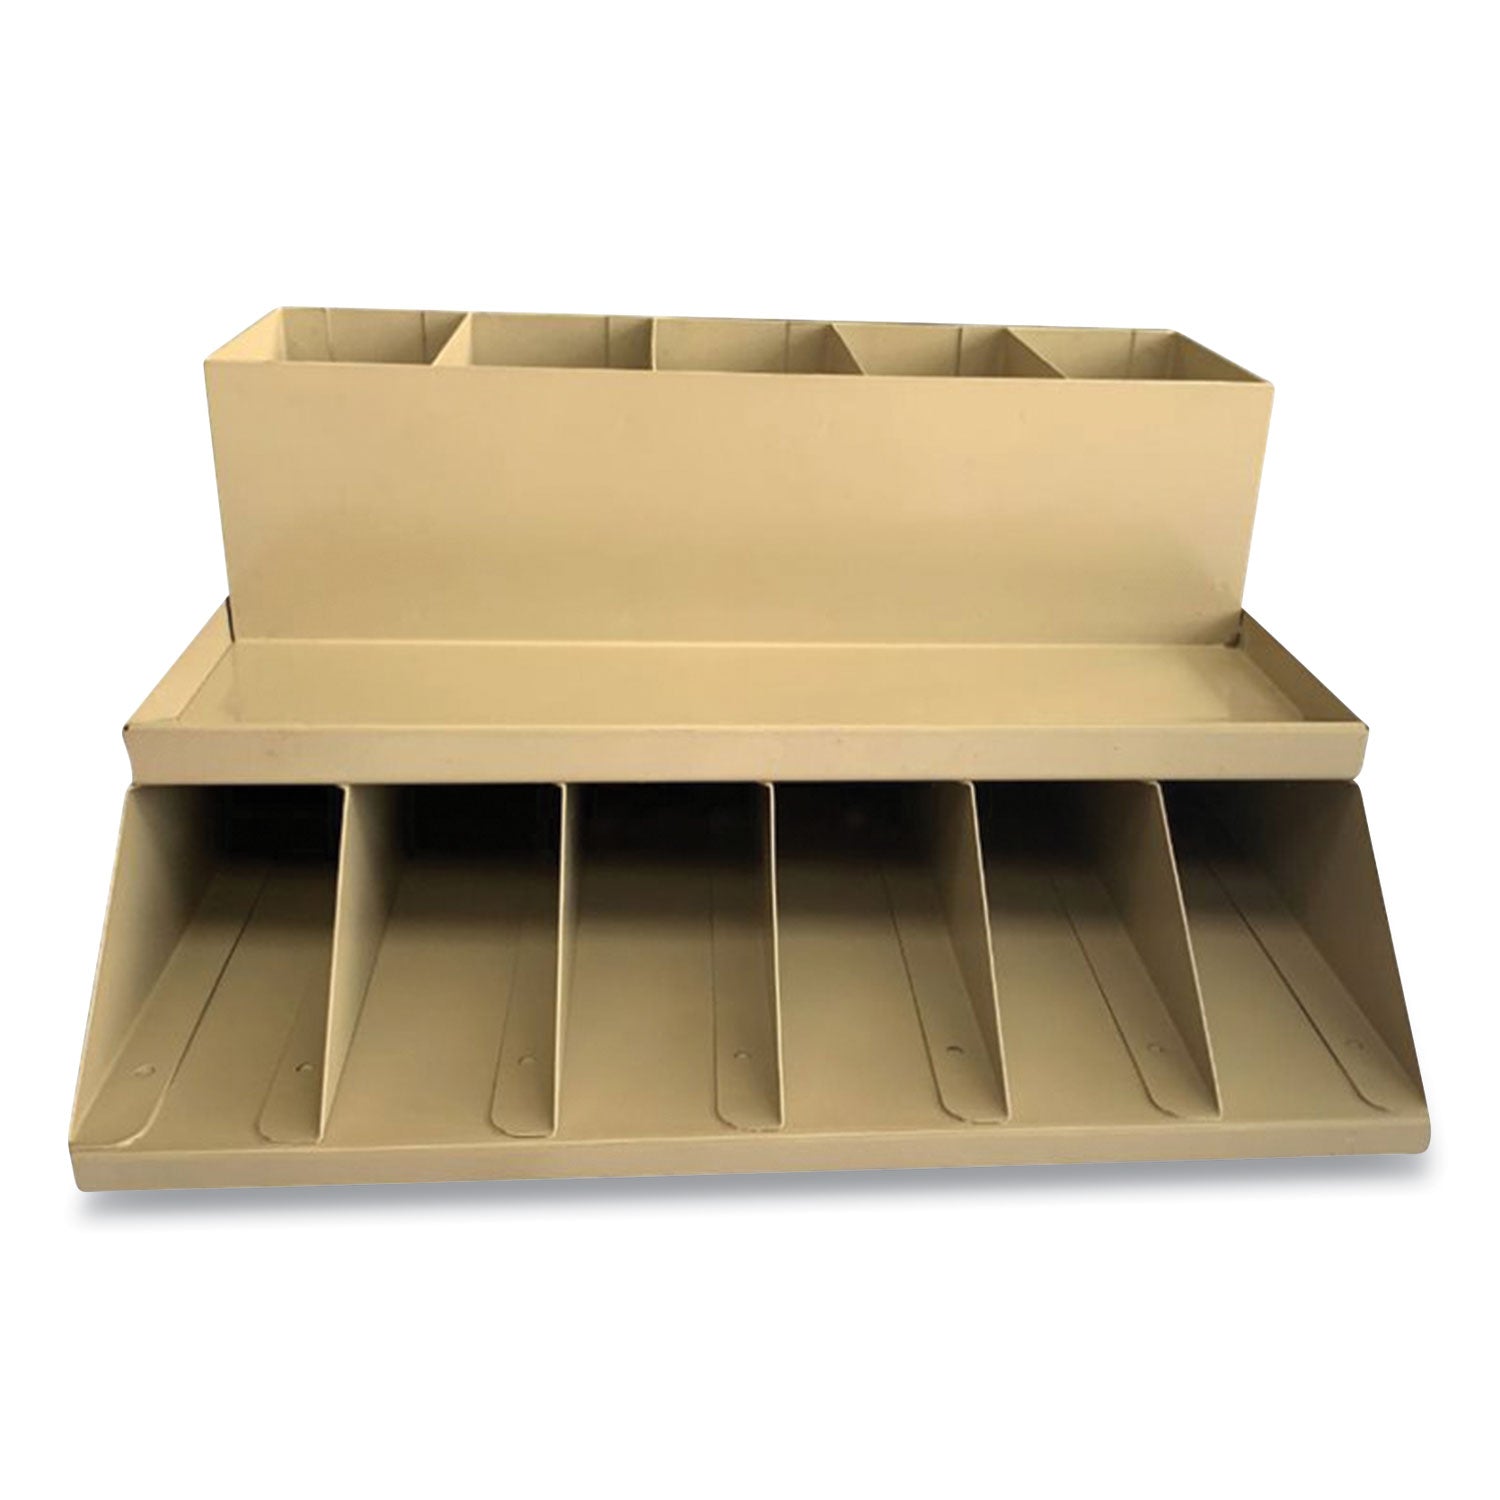 coin-wrapper-and-bill-strap-2-tier-rack-11-compartments-938-x-813-463-plastic-pebble-beige_cnk500013 - 1